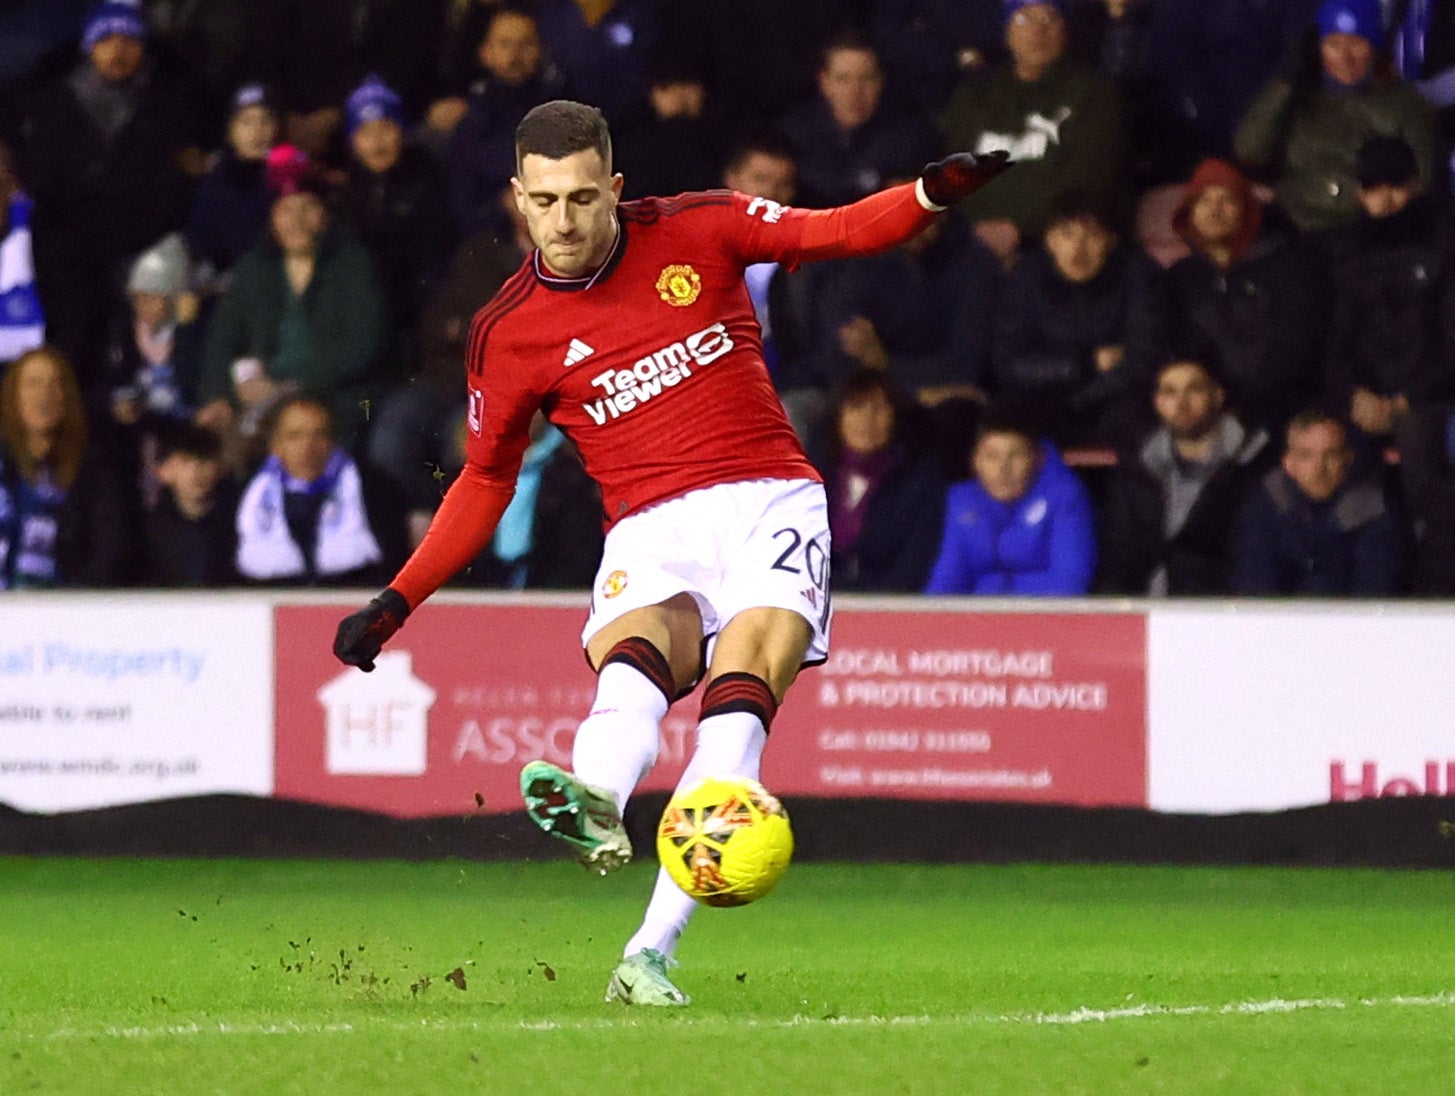 Diogo Dalot in action during the Cup third round tie